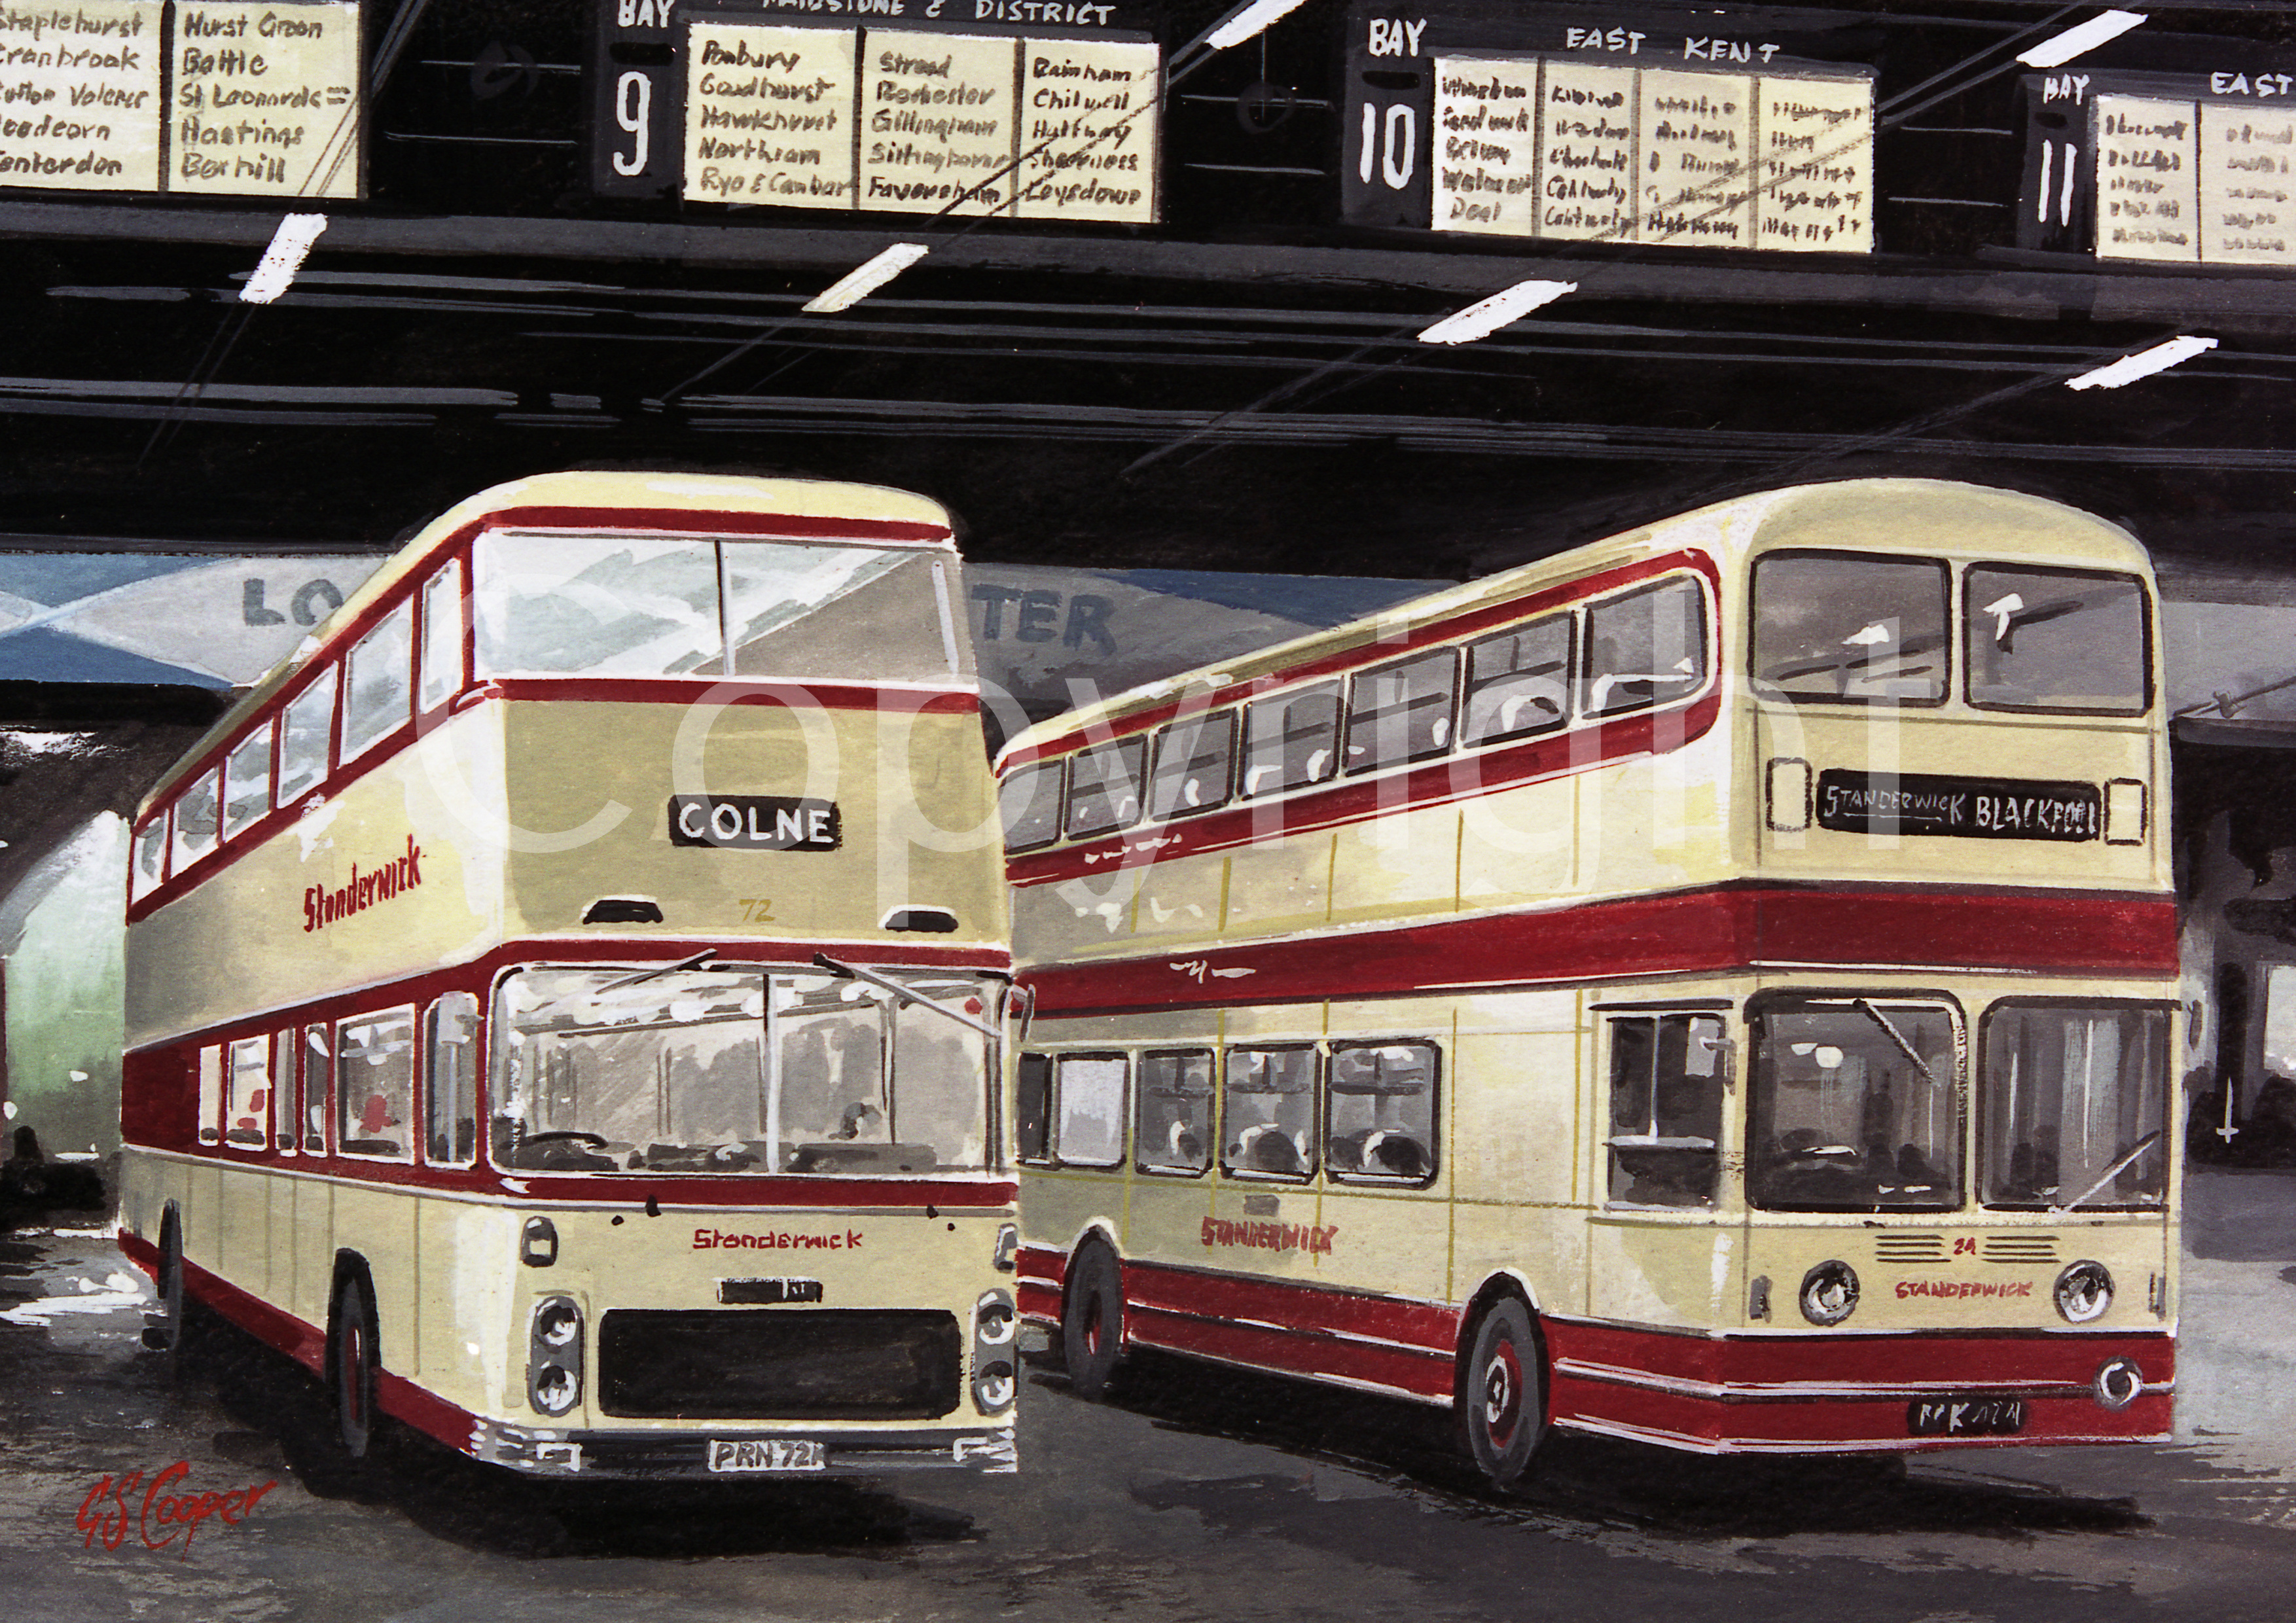 London Victoria Coach Station Bus To Blackpool Large Metal Wall Art.